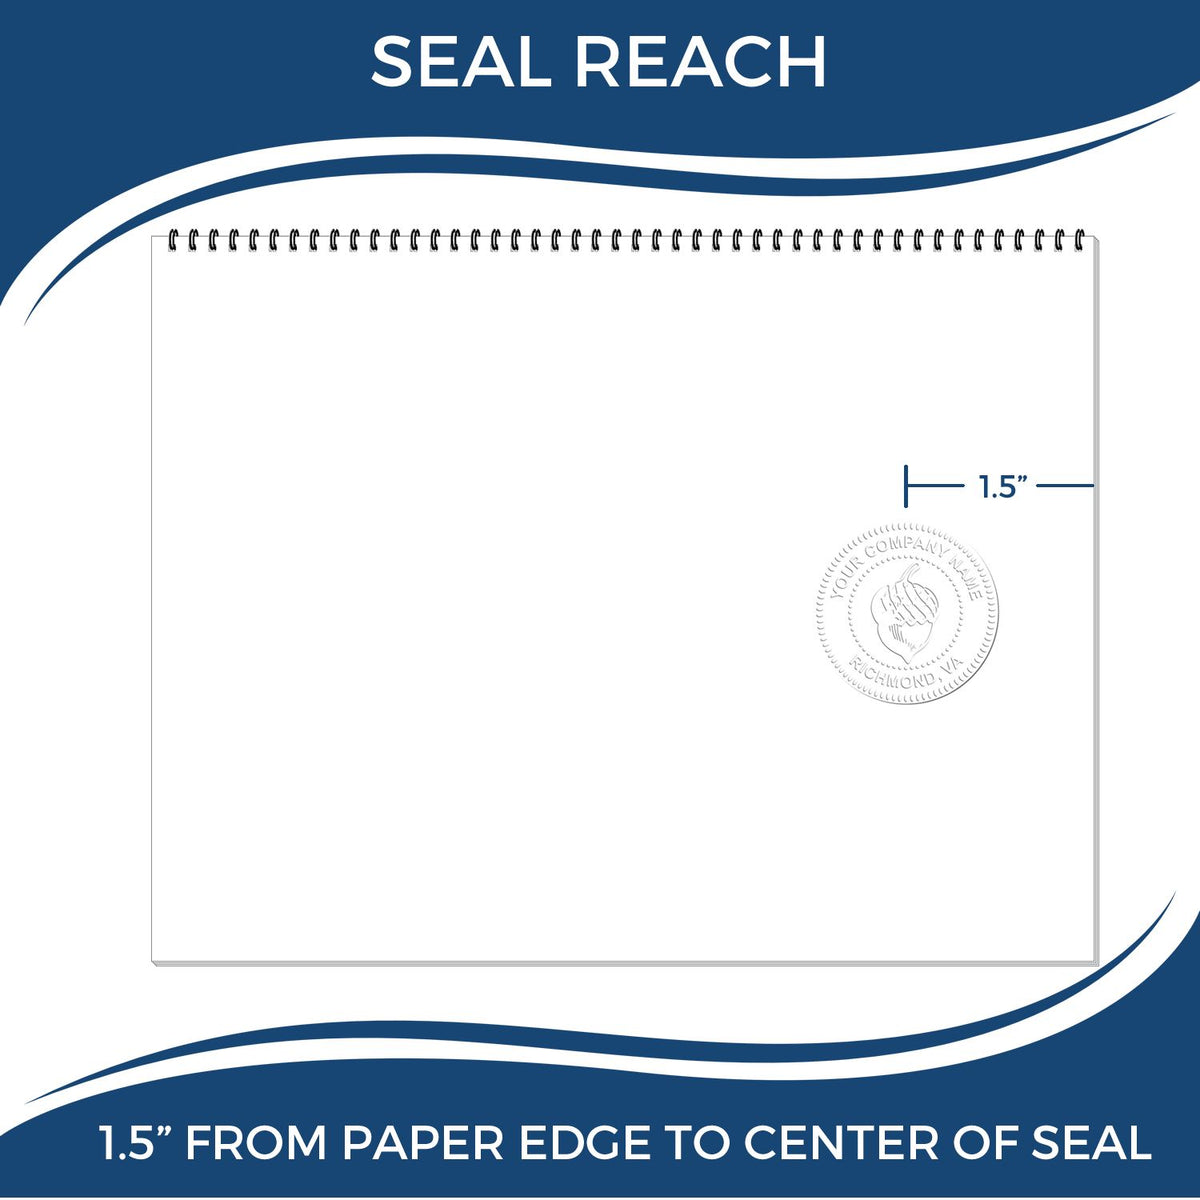 An infographic showing the seal reach which is represented by a ruler and a miniature seal image of the Handheld Virginia Architect Seal Embosser